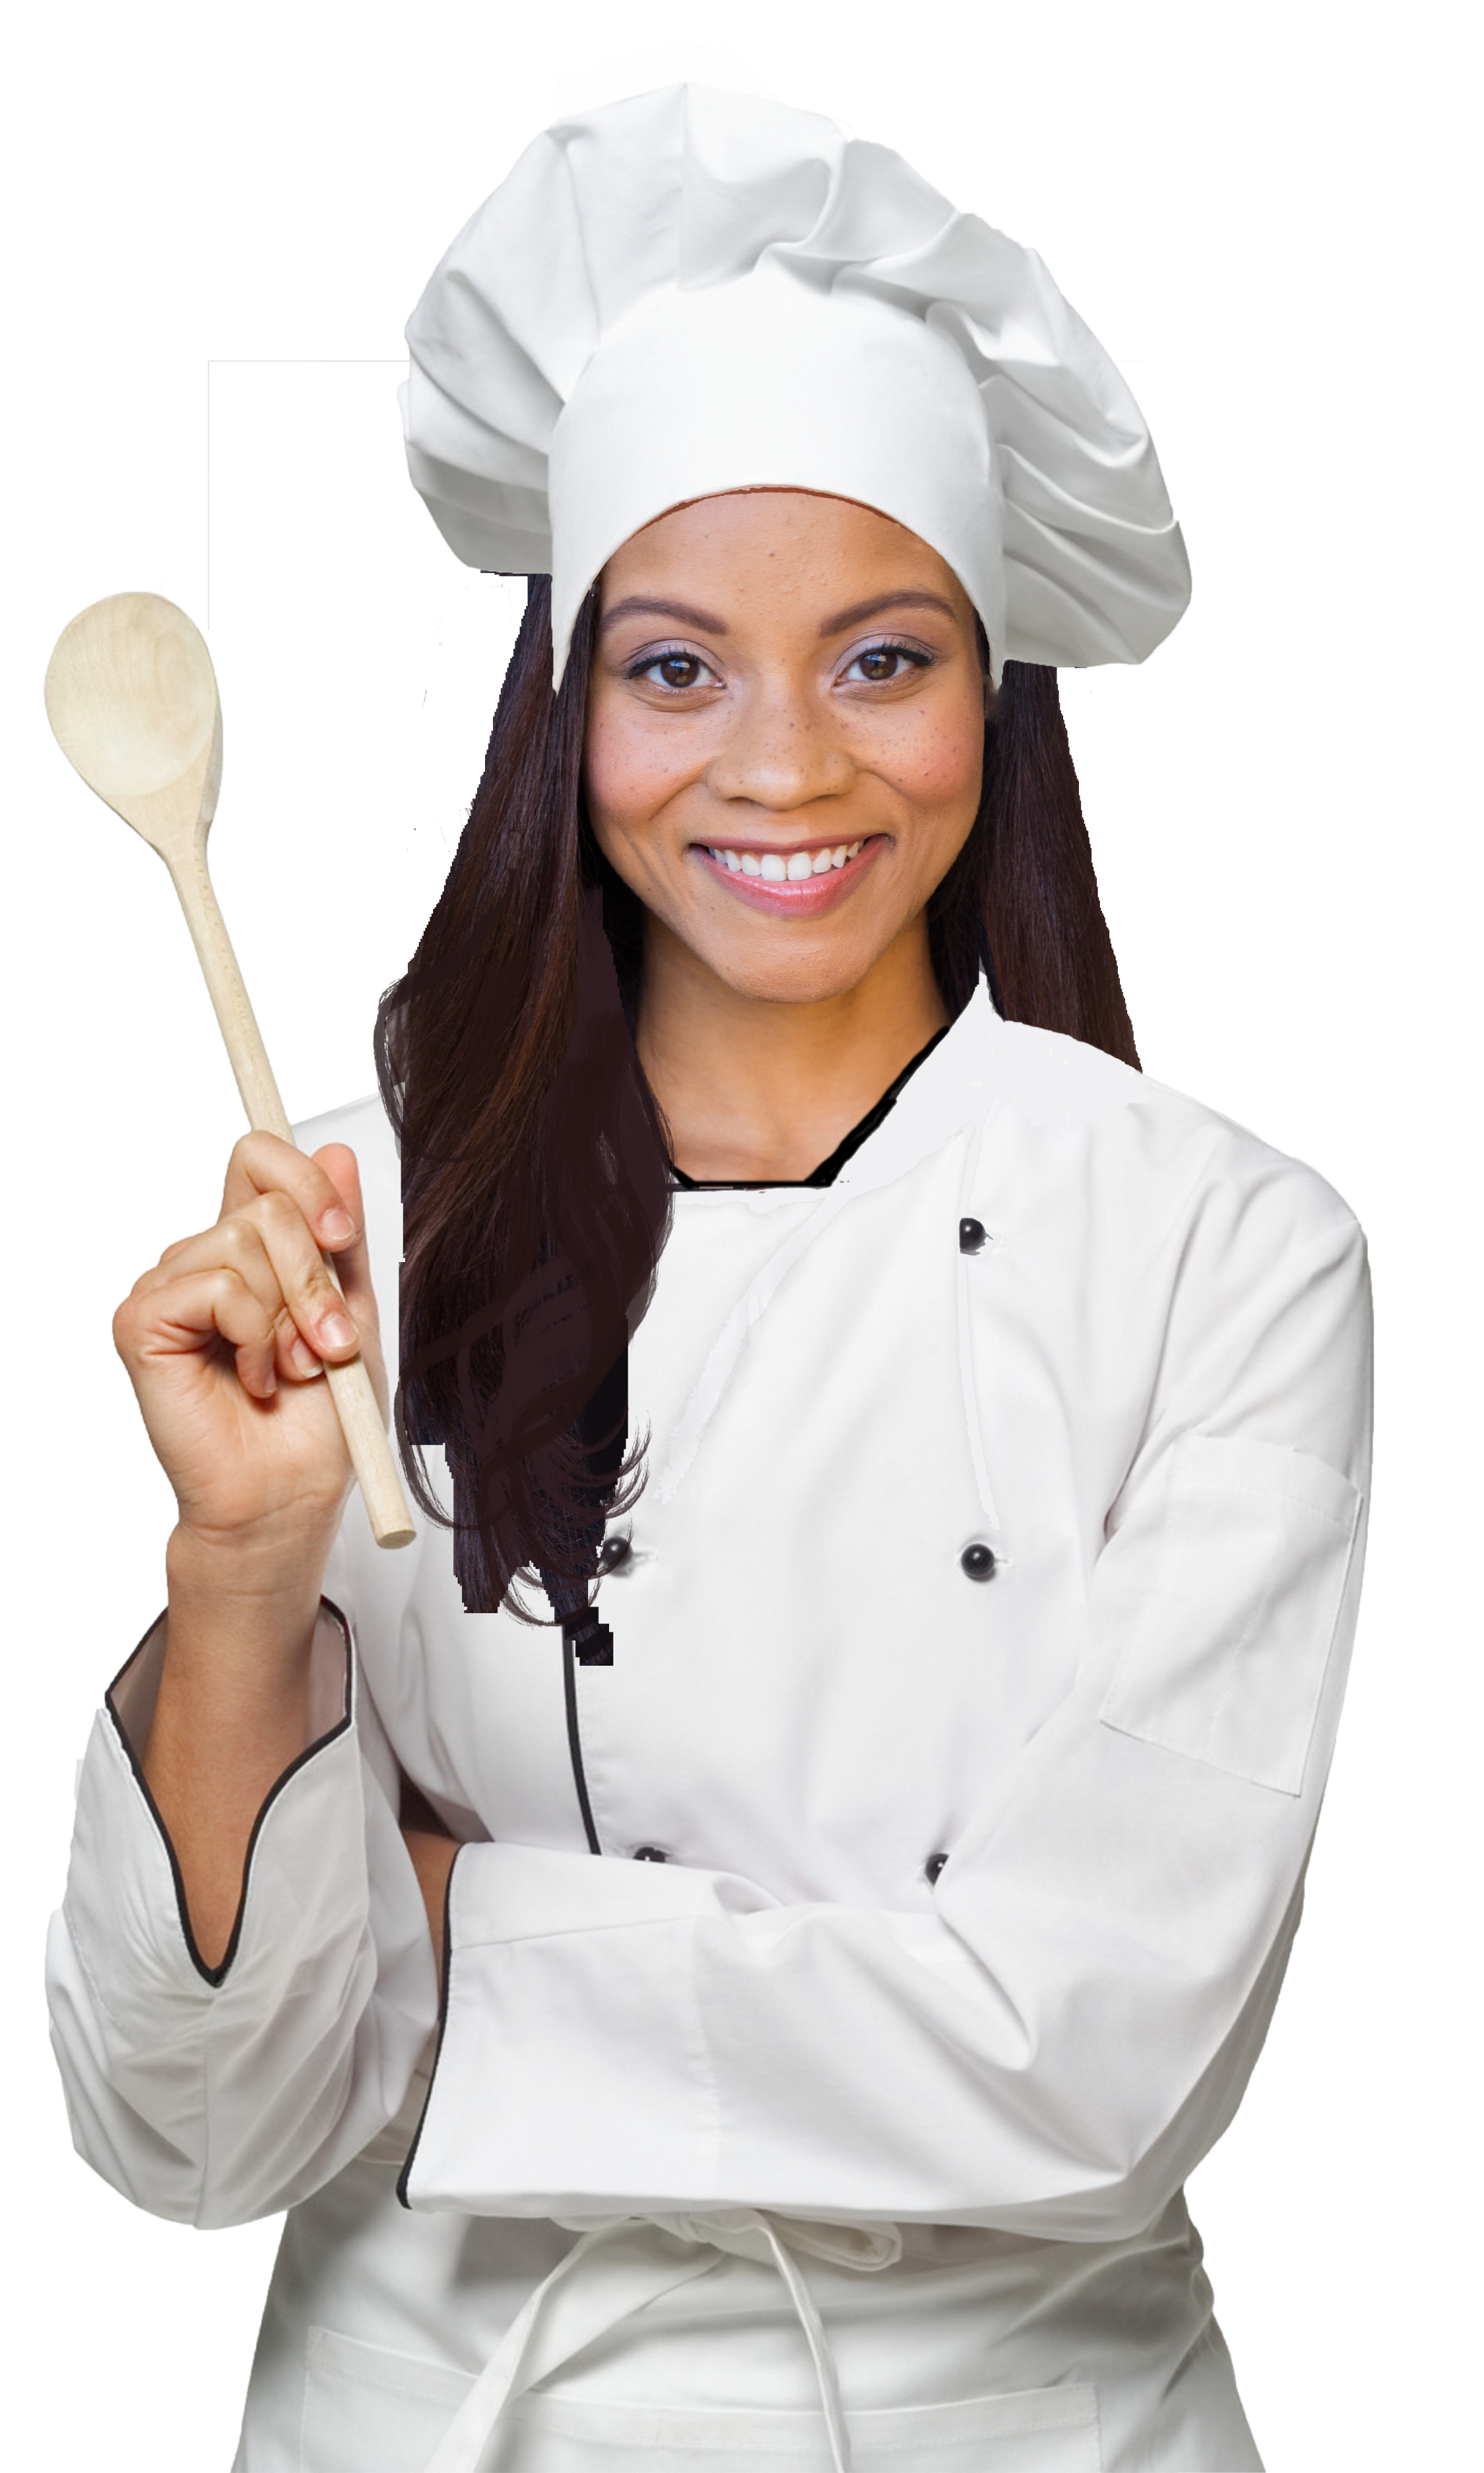 A Woman In Chef's Uniform Holding A Wooden Spoon